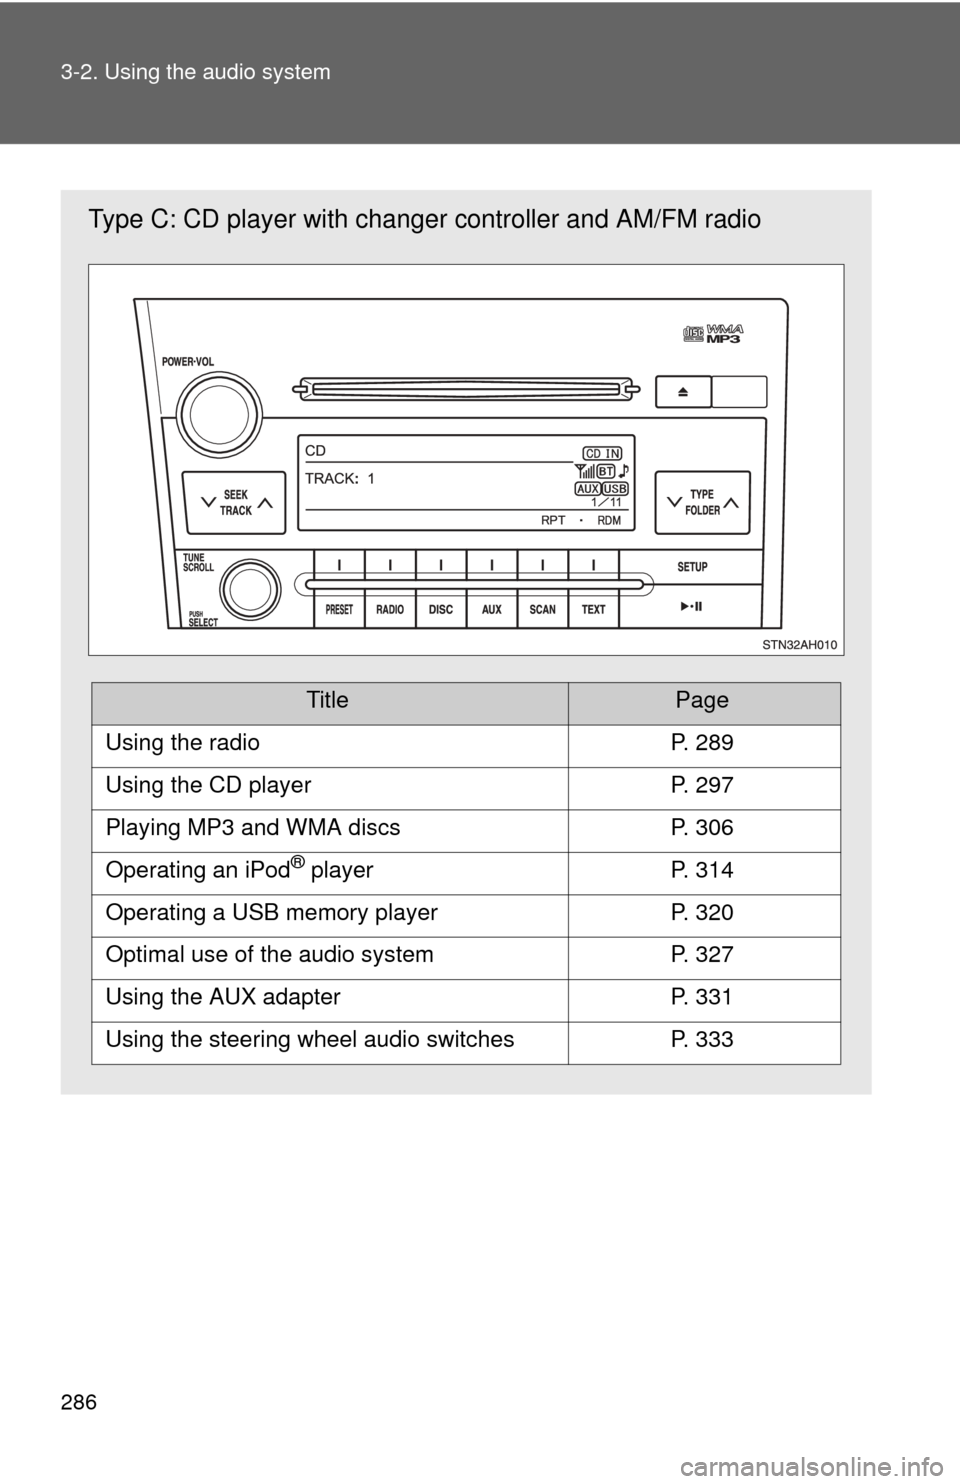 TOYOTA SEQUOIA 2010 2.G Owners Manual 286 3-2. Using the audio system
Type C: CD player with changer controller and AM/FM radio
TitlePage
Using the radioP. 289
Using the CD playerP. 297
Playing MP3 and WMA discsP. 306
Operating an iPod® 